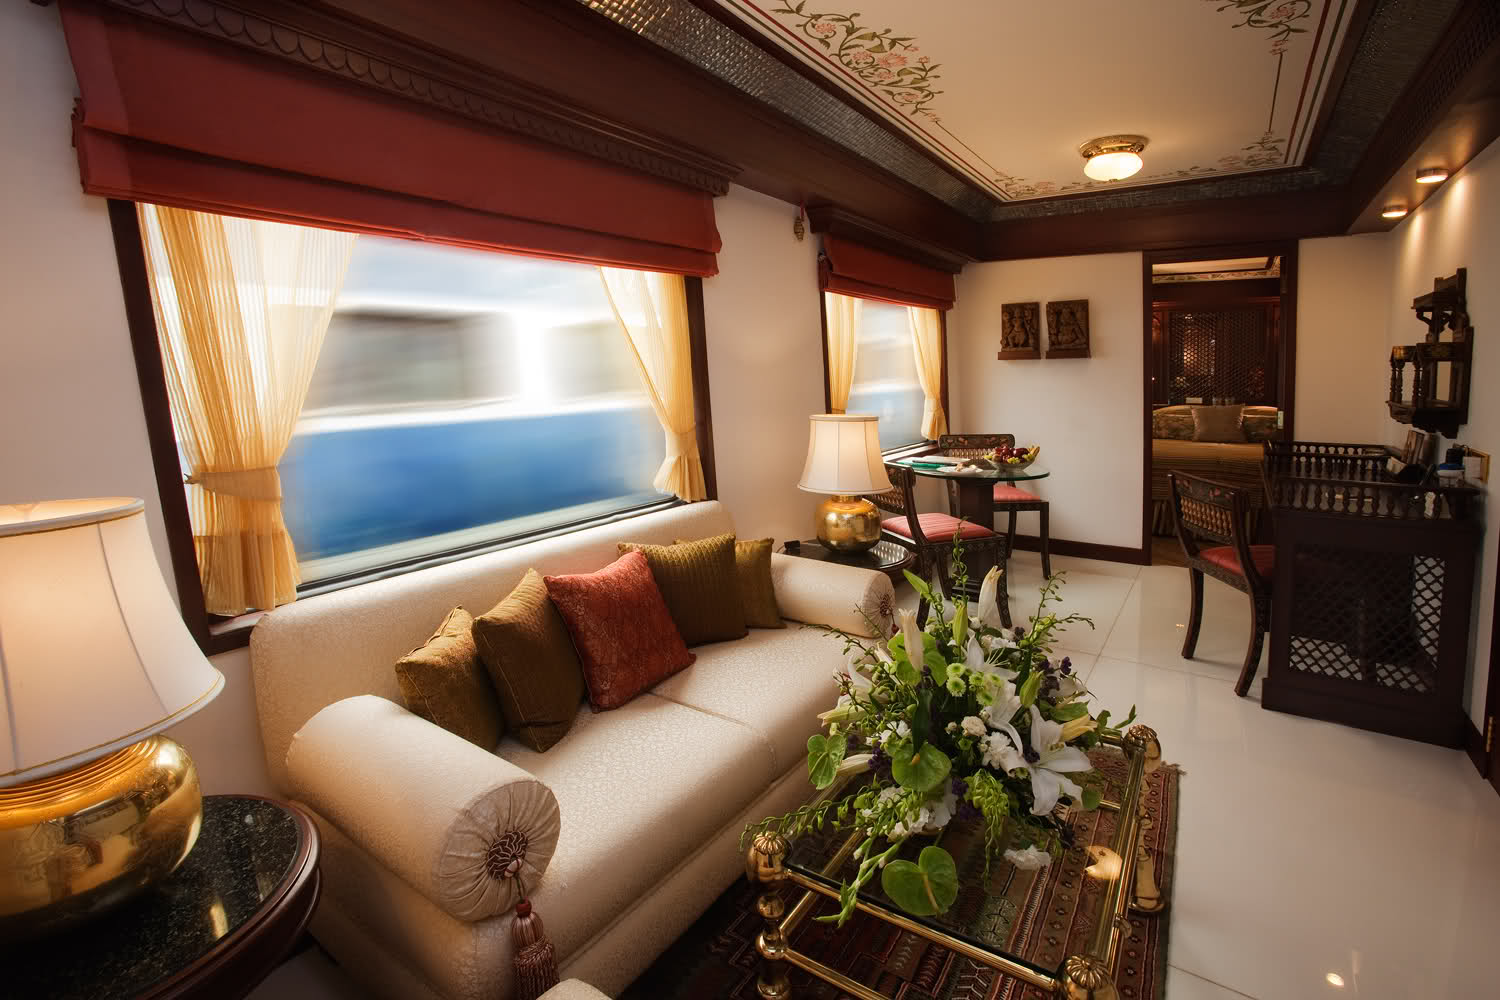 WHAT YOU SHOULD KNOW BEFORE BOOKING A LUXURY TRAIN JOURNEY IN INDIA